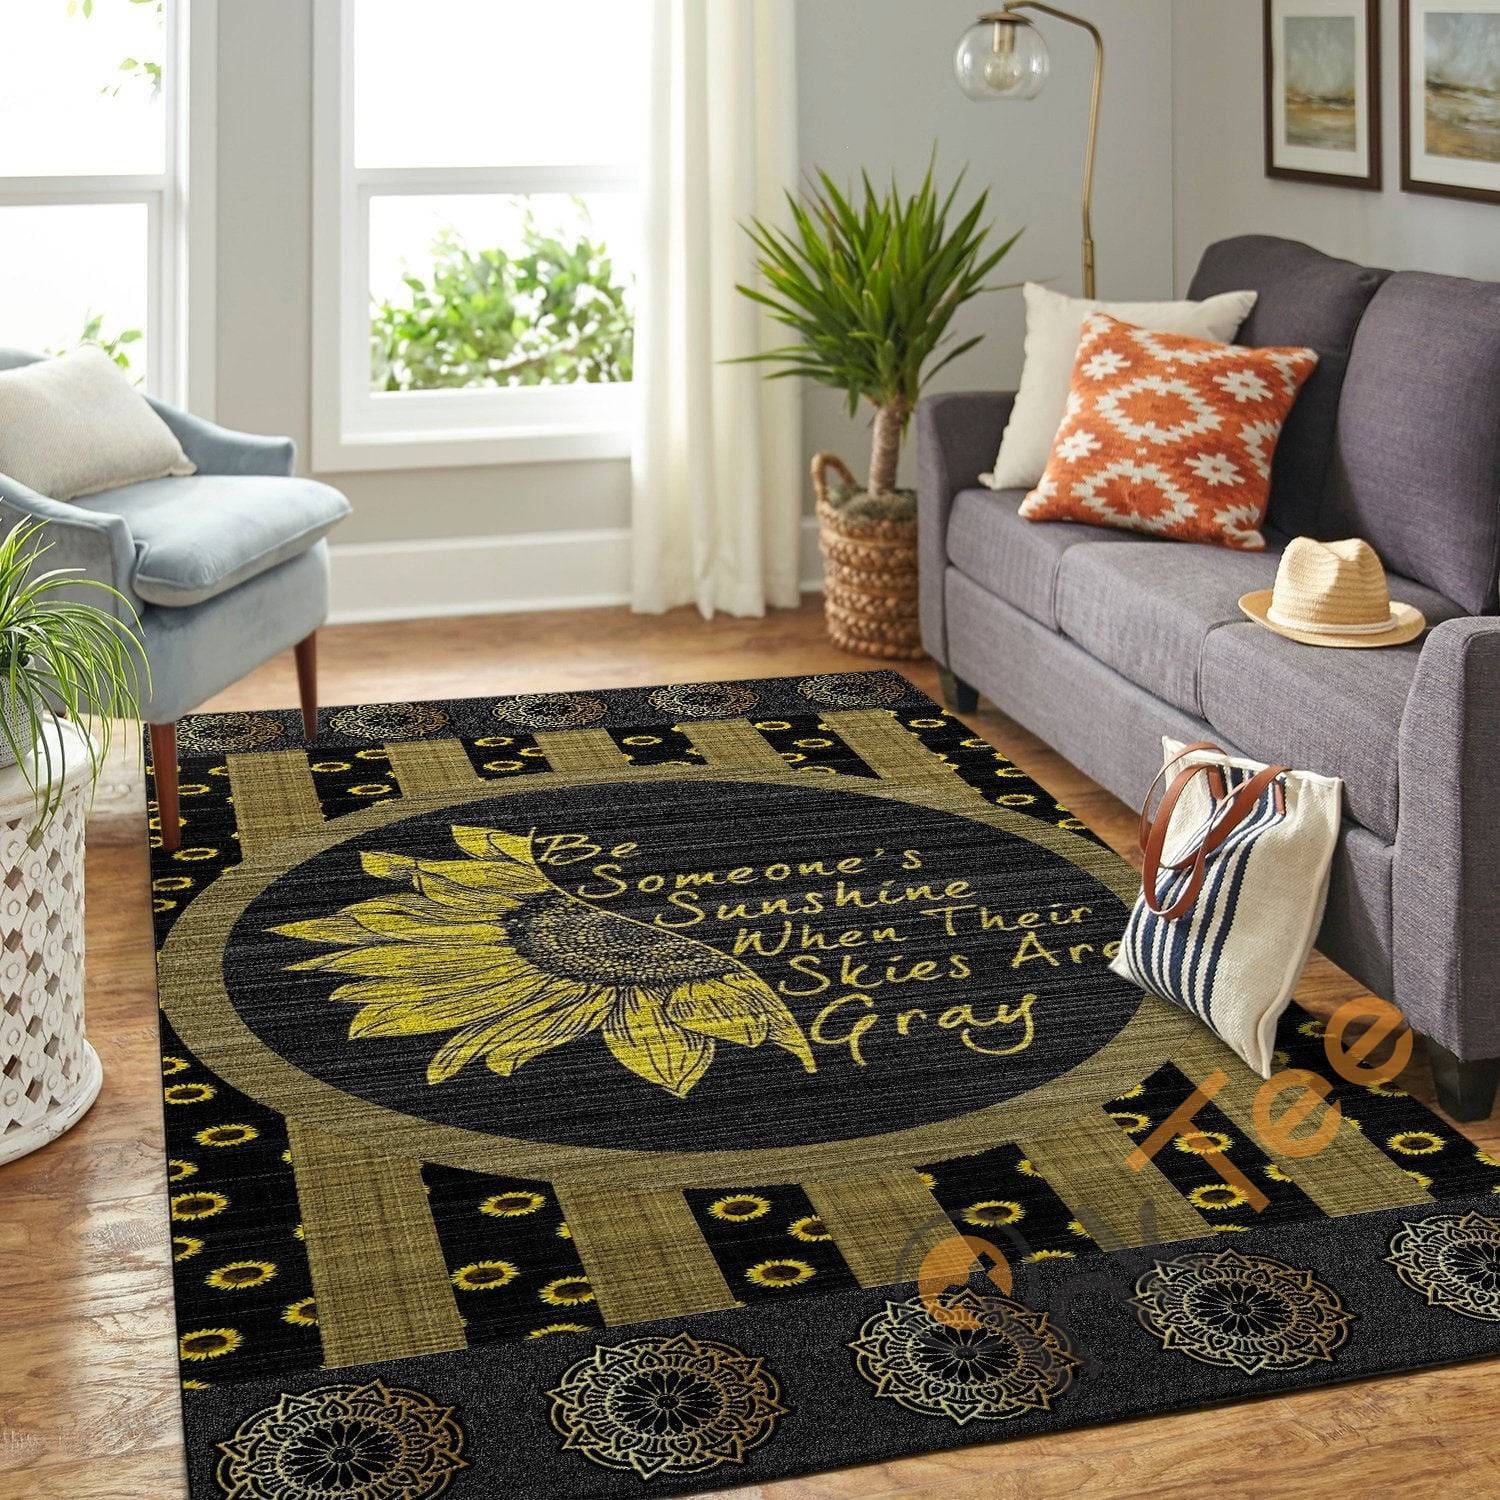 Be Someone's Sunshine When Their Shies Are Grey Hippie Floor Decor Soft Living Room Bedroom Carpet Highlight For Home Rug